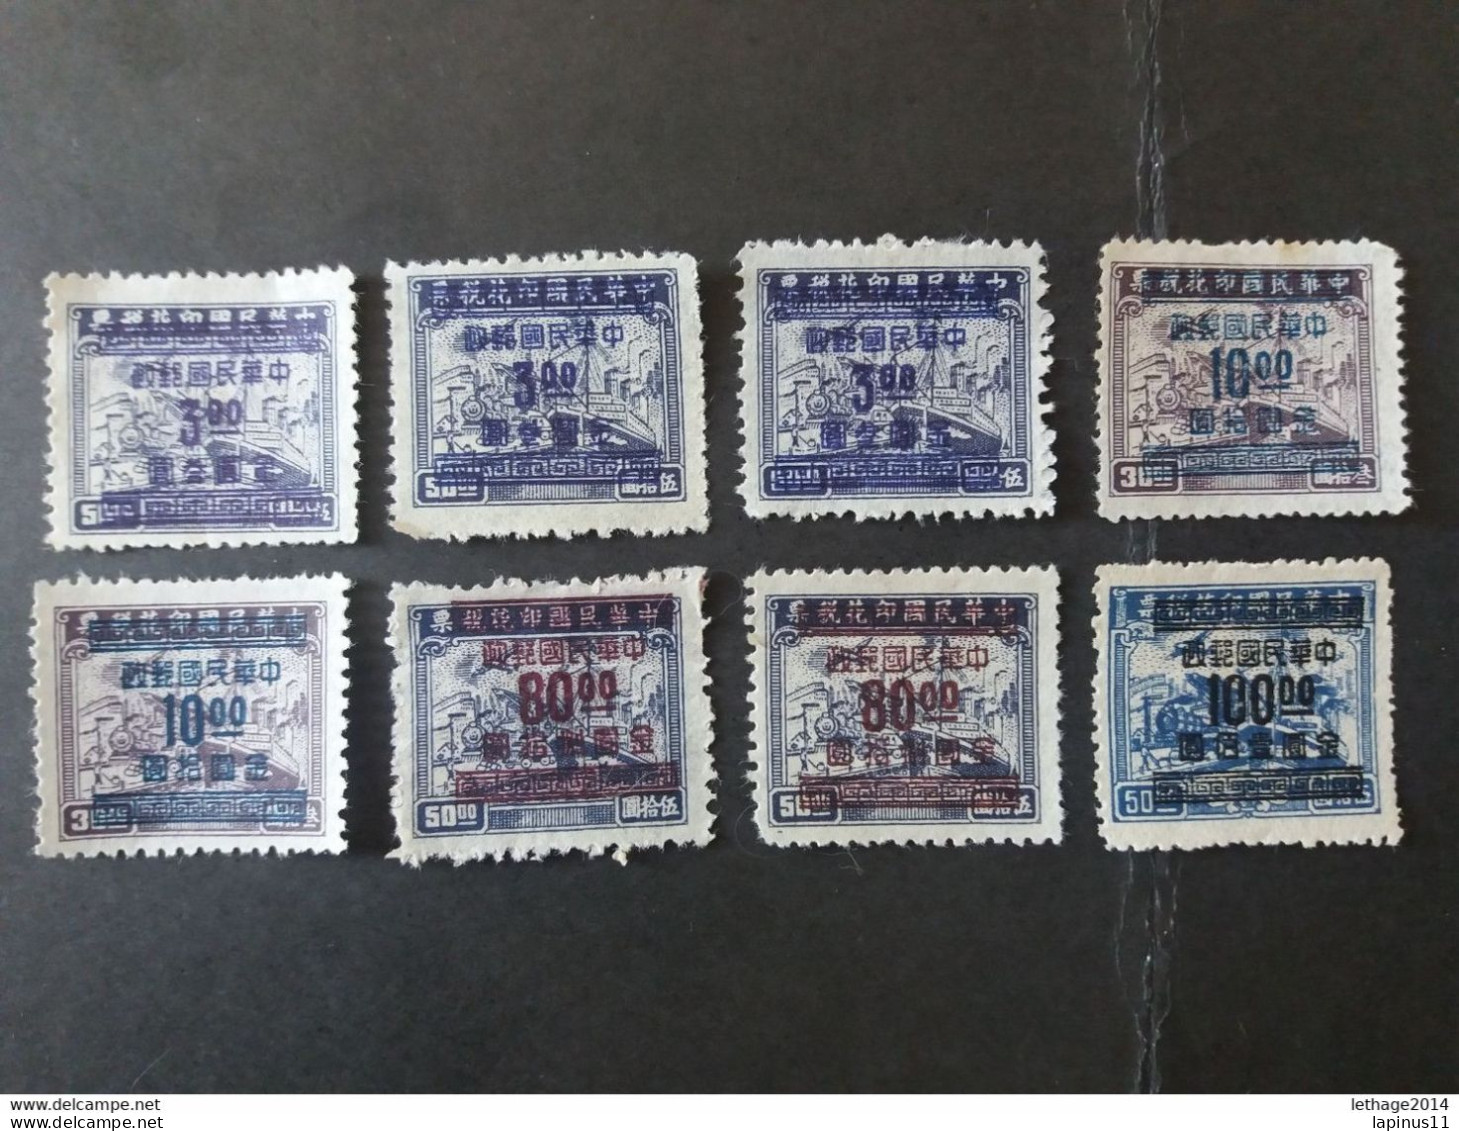 CHINE 中國 CHINA 1949 Revenue Stamps Surcharged - 1912-1949 Republic